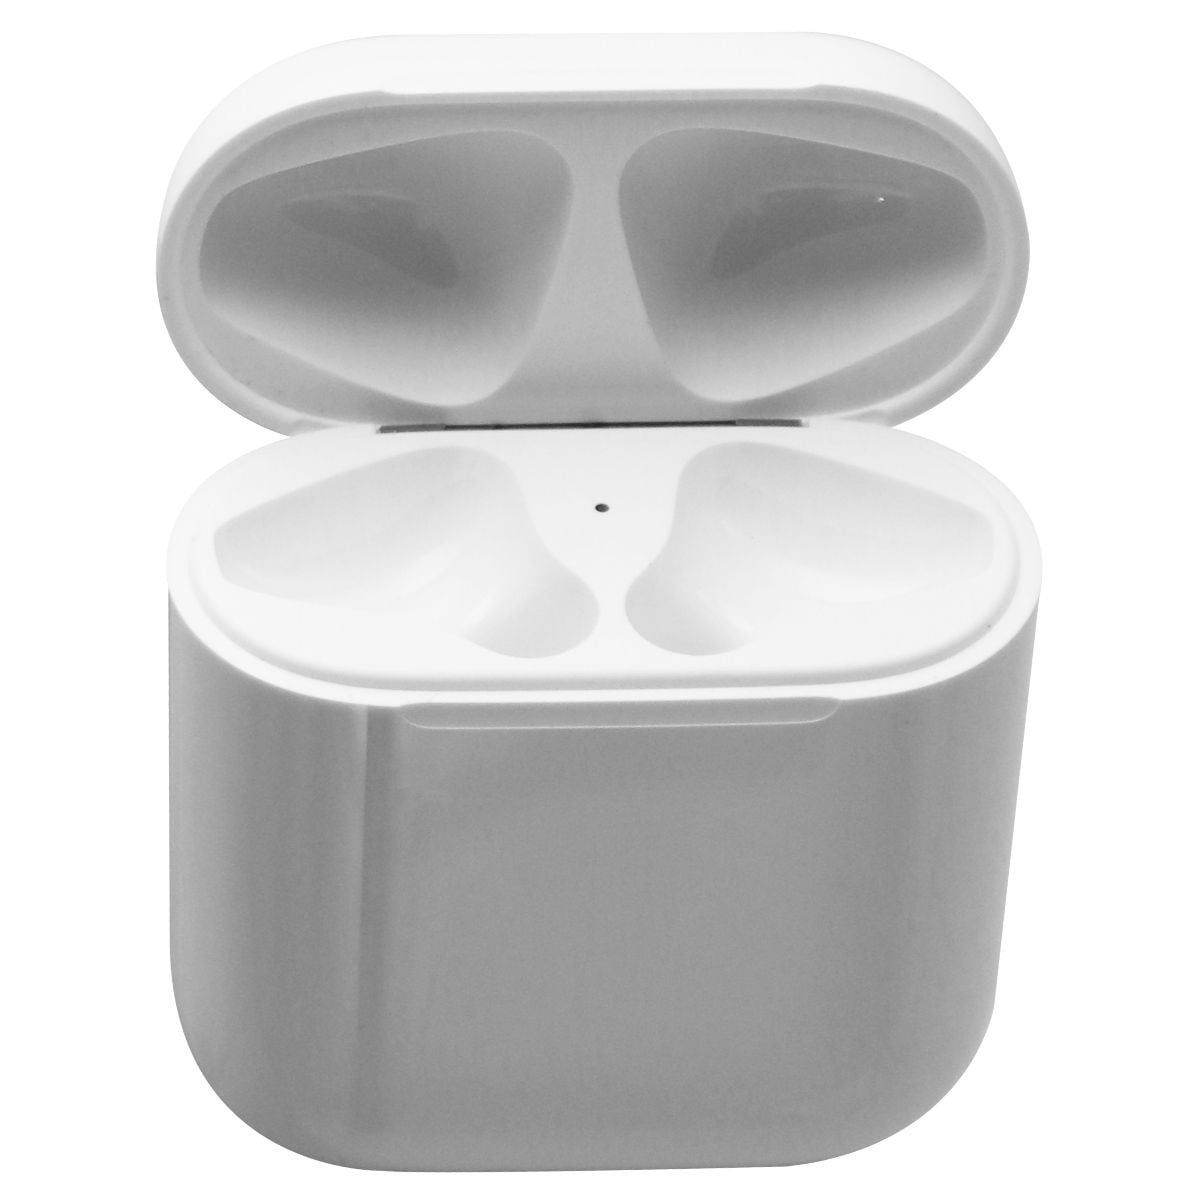 static game Bloody a1602 airpods Off 72% - www.pizza-place.fr